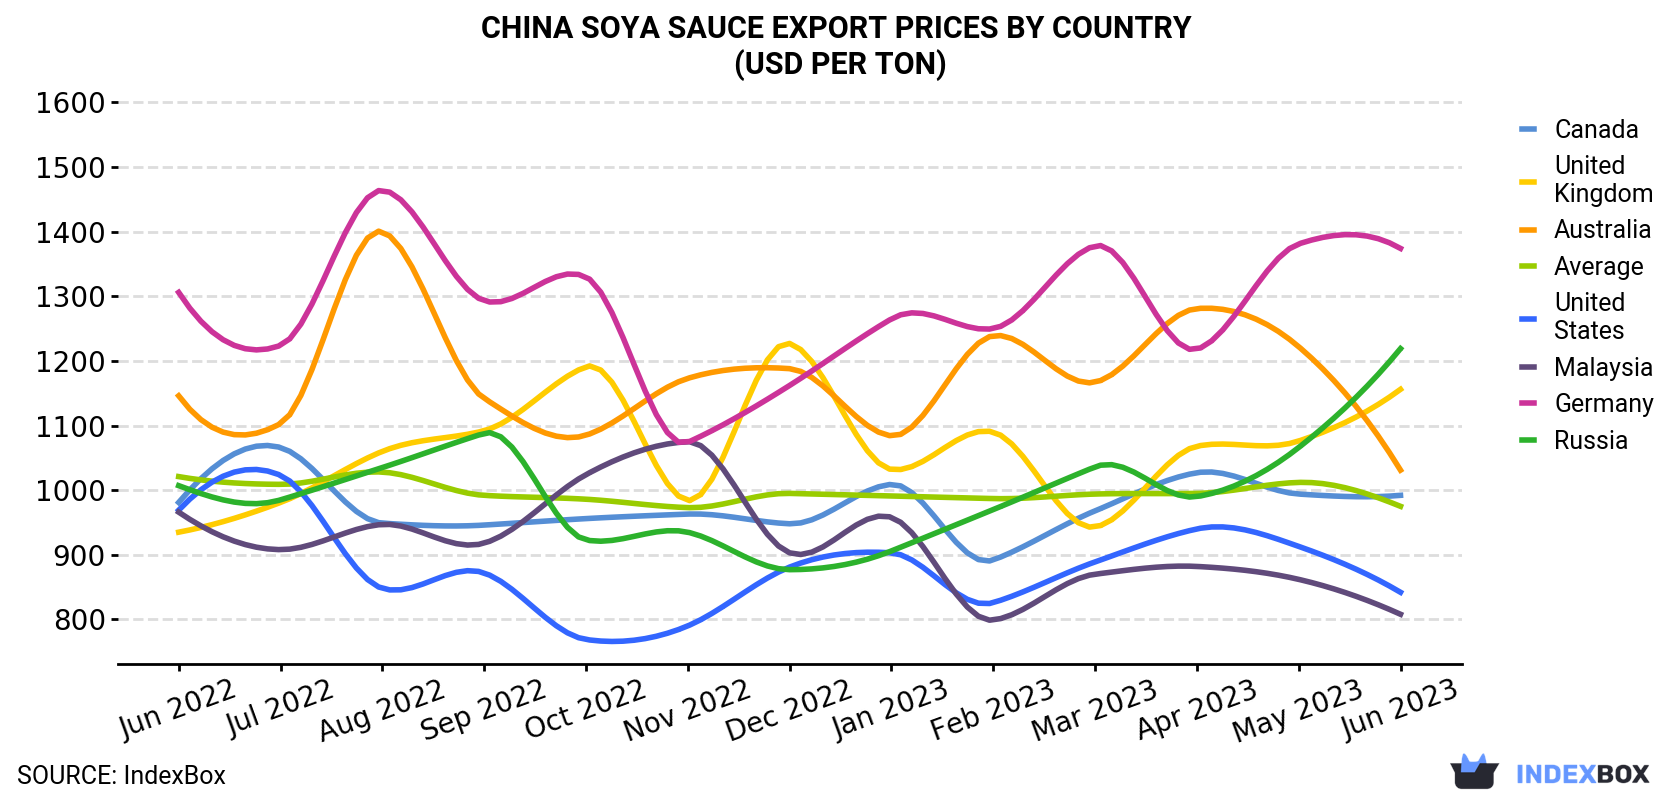 China Soya Sauce Export Prices By Country (USD Per Ton)